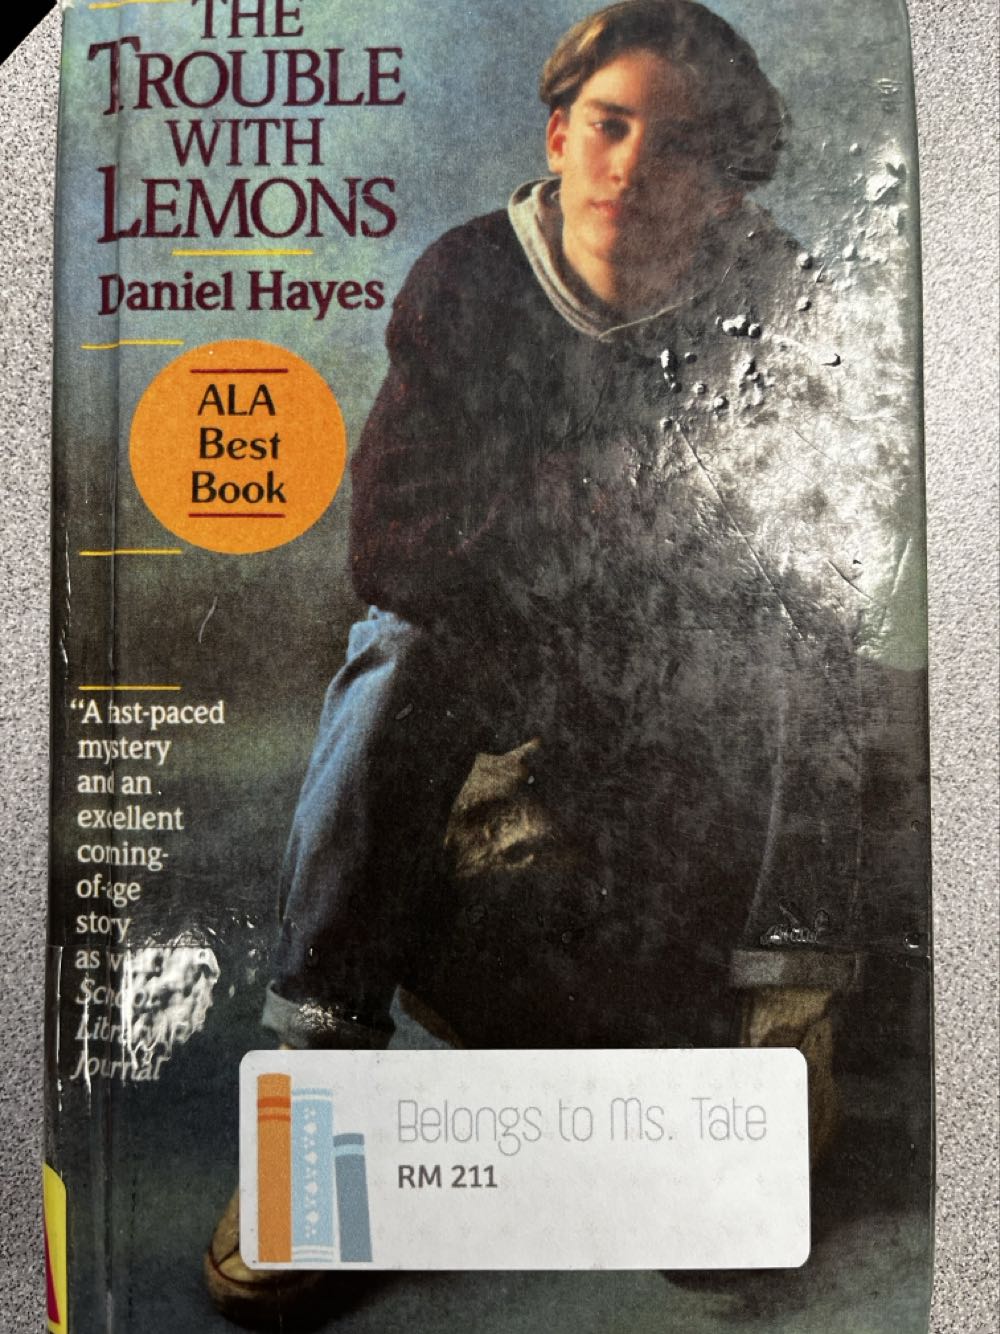 The Trouble with Lemons - Daniel Hayes book collectible [Barcode 9780758791566] - Main Image 1